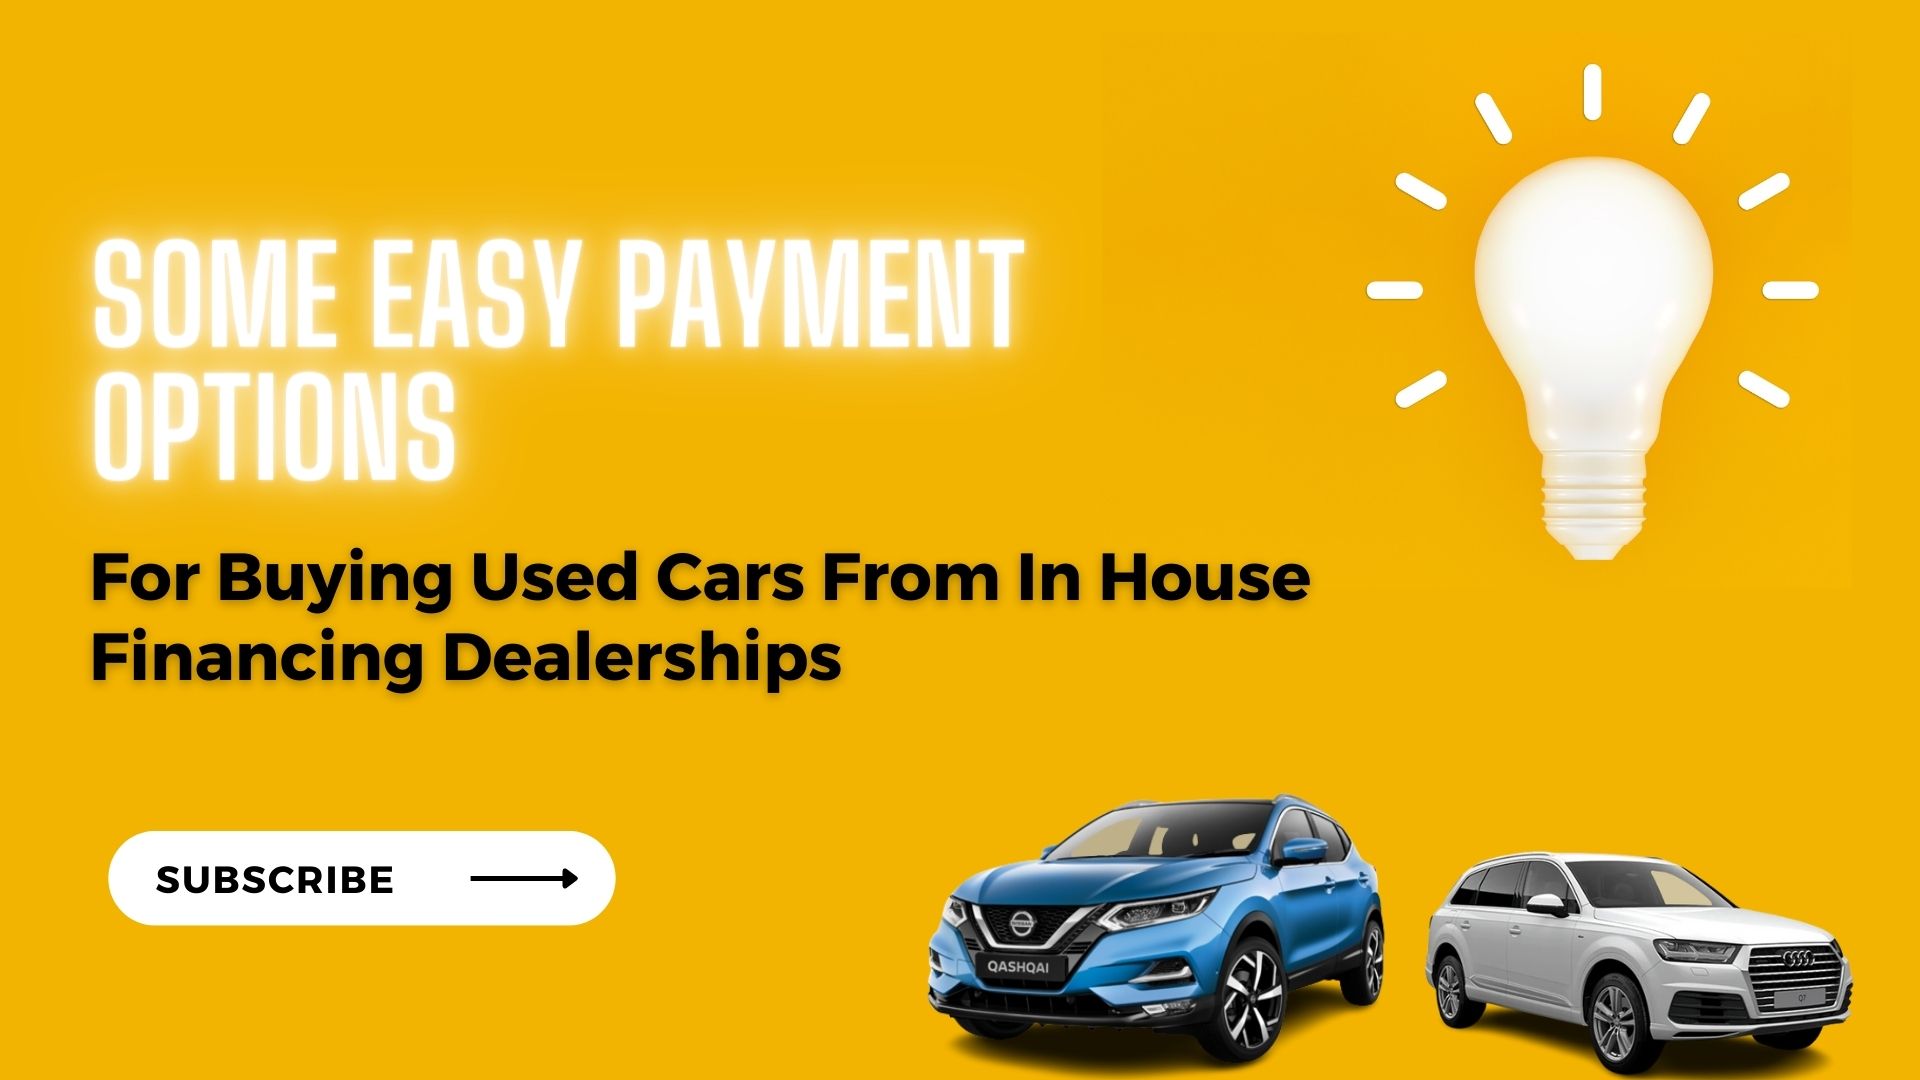 Buying Used Cars From In House Financing Dealerships